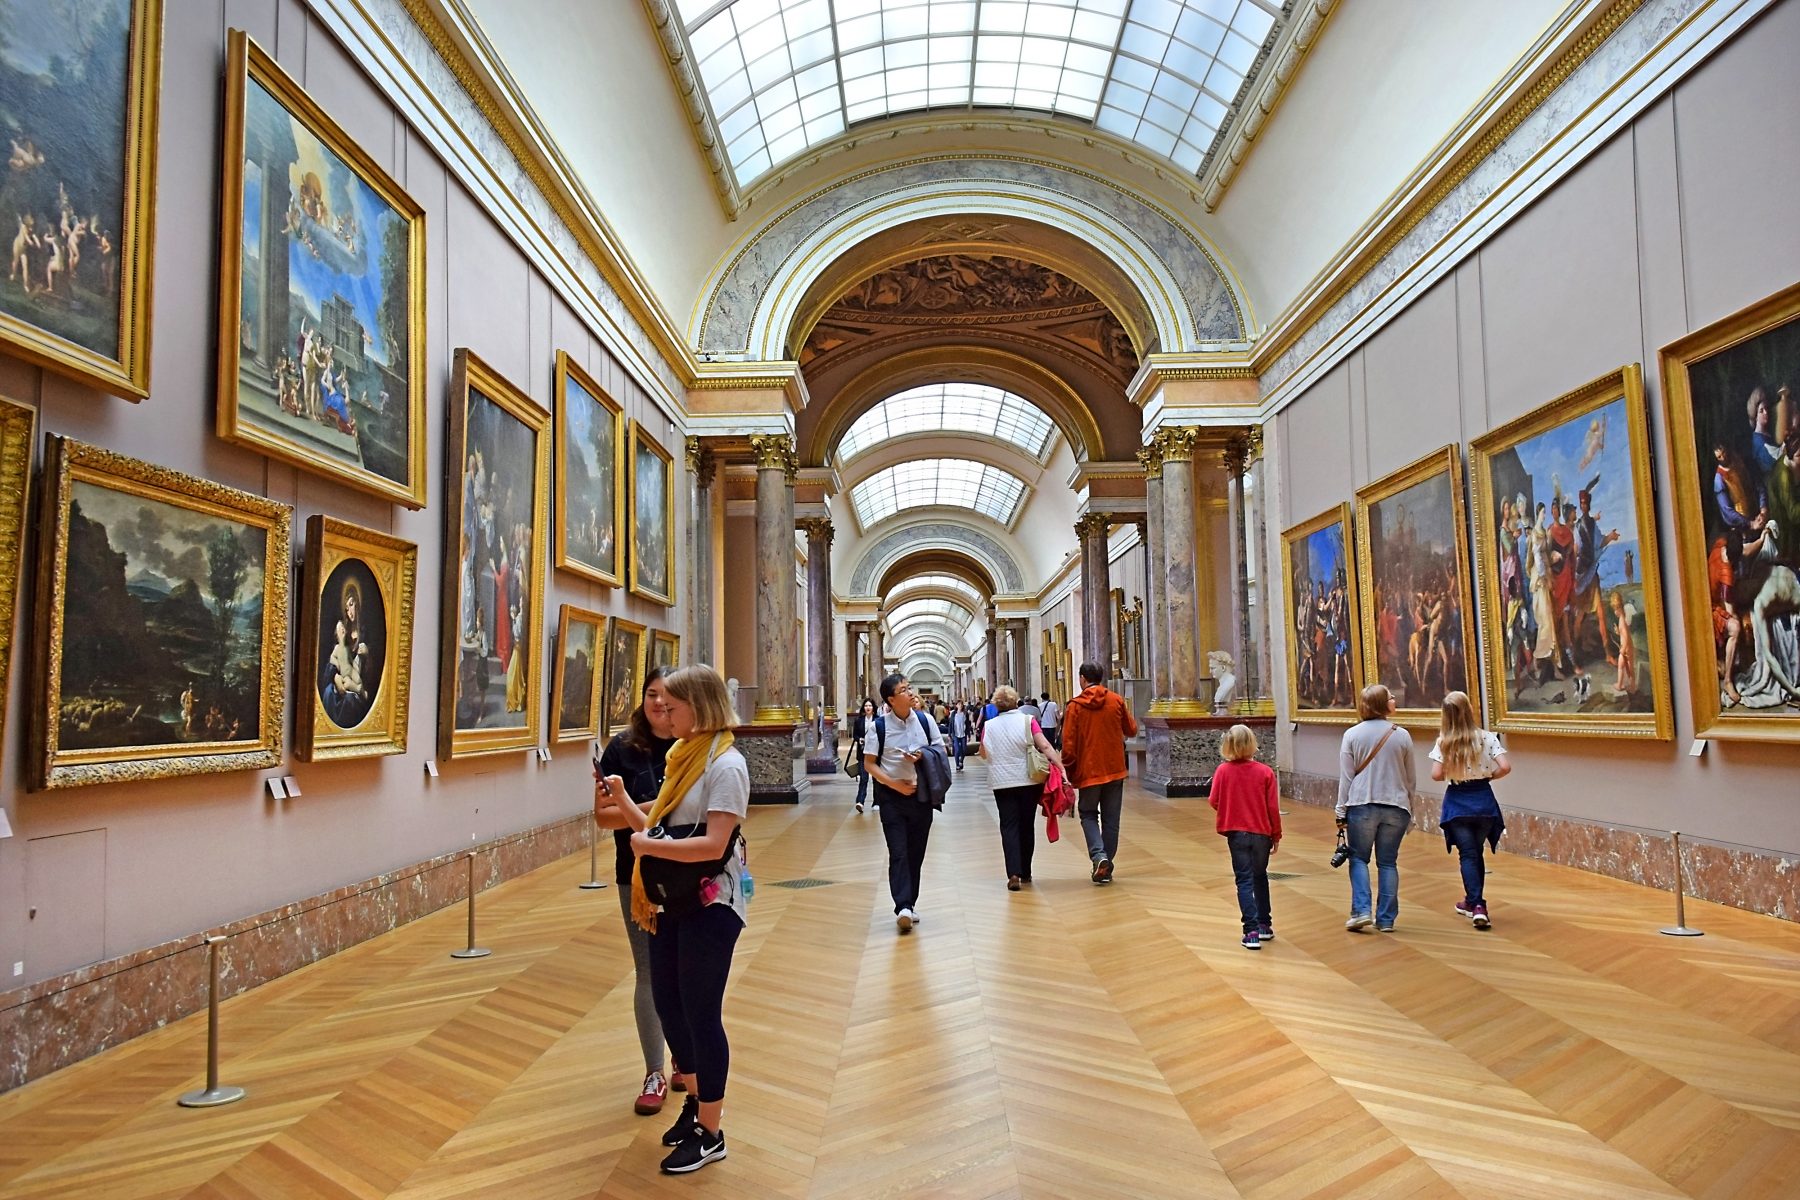 Visitors of Louvre Museum